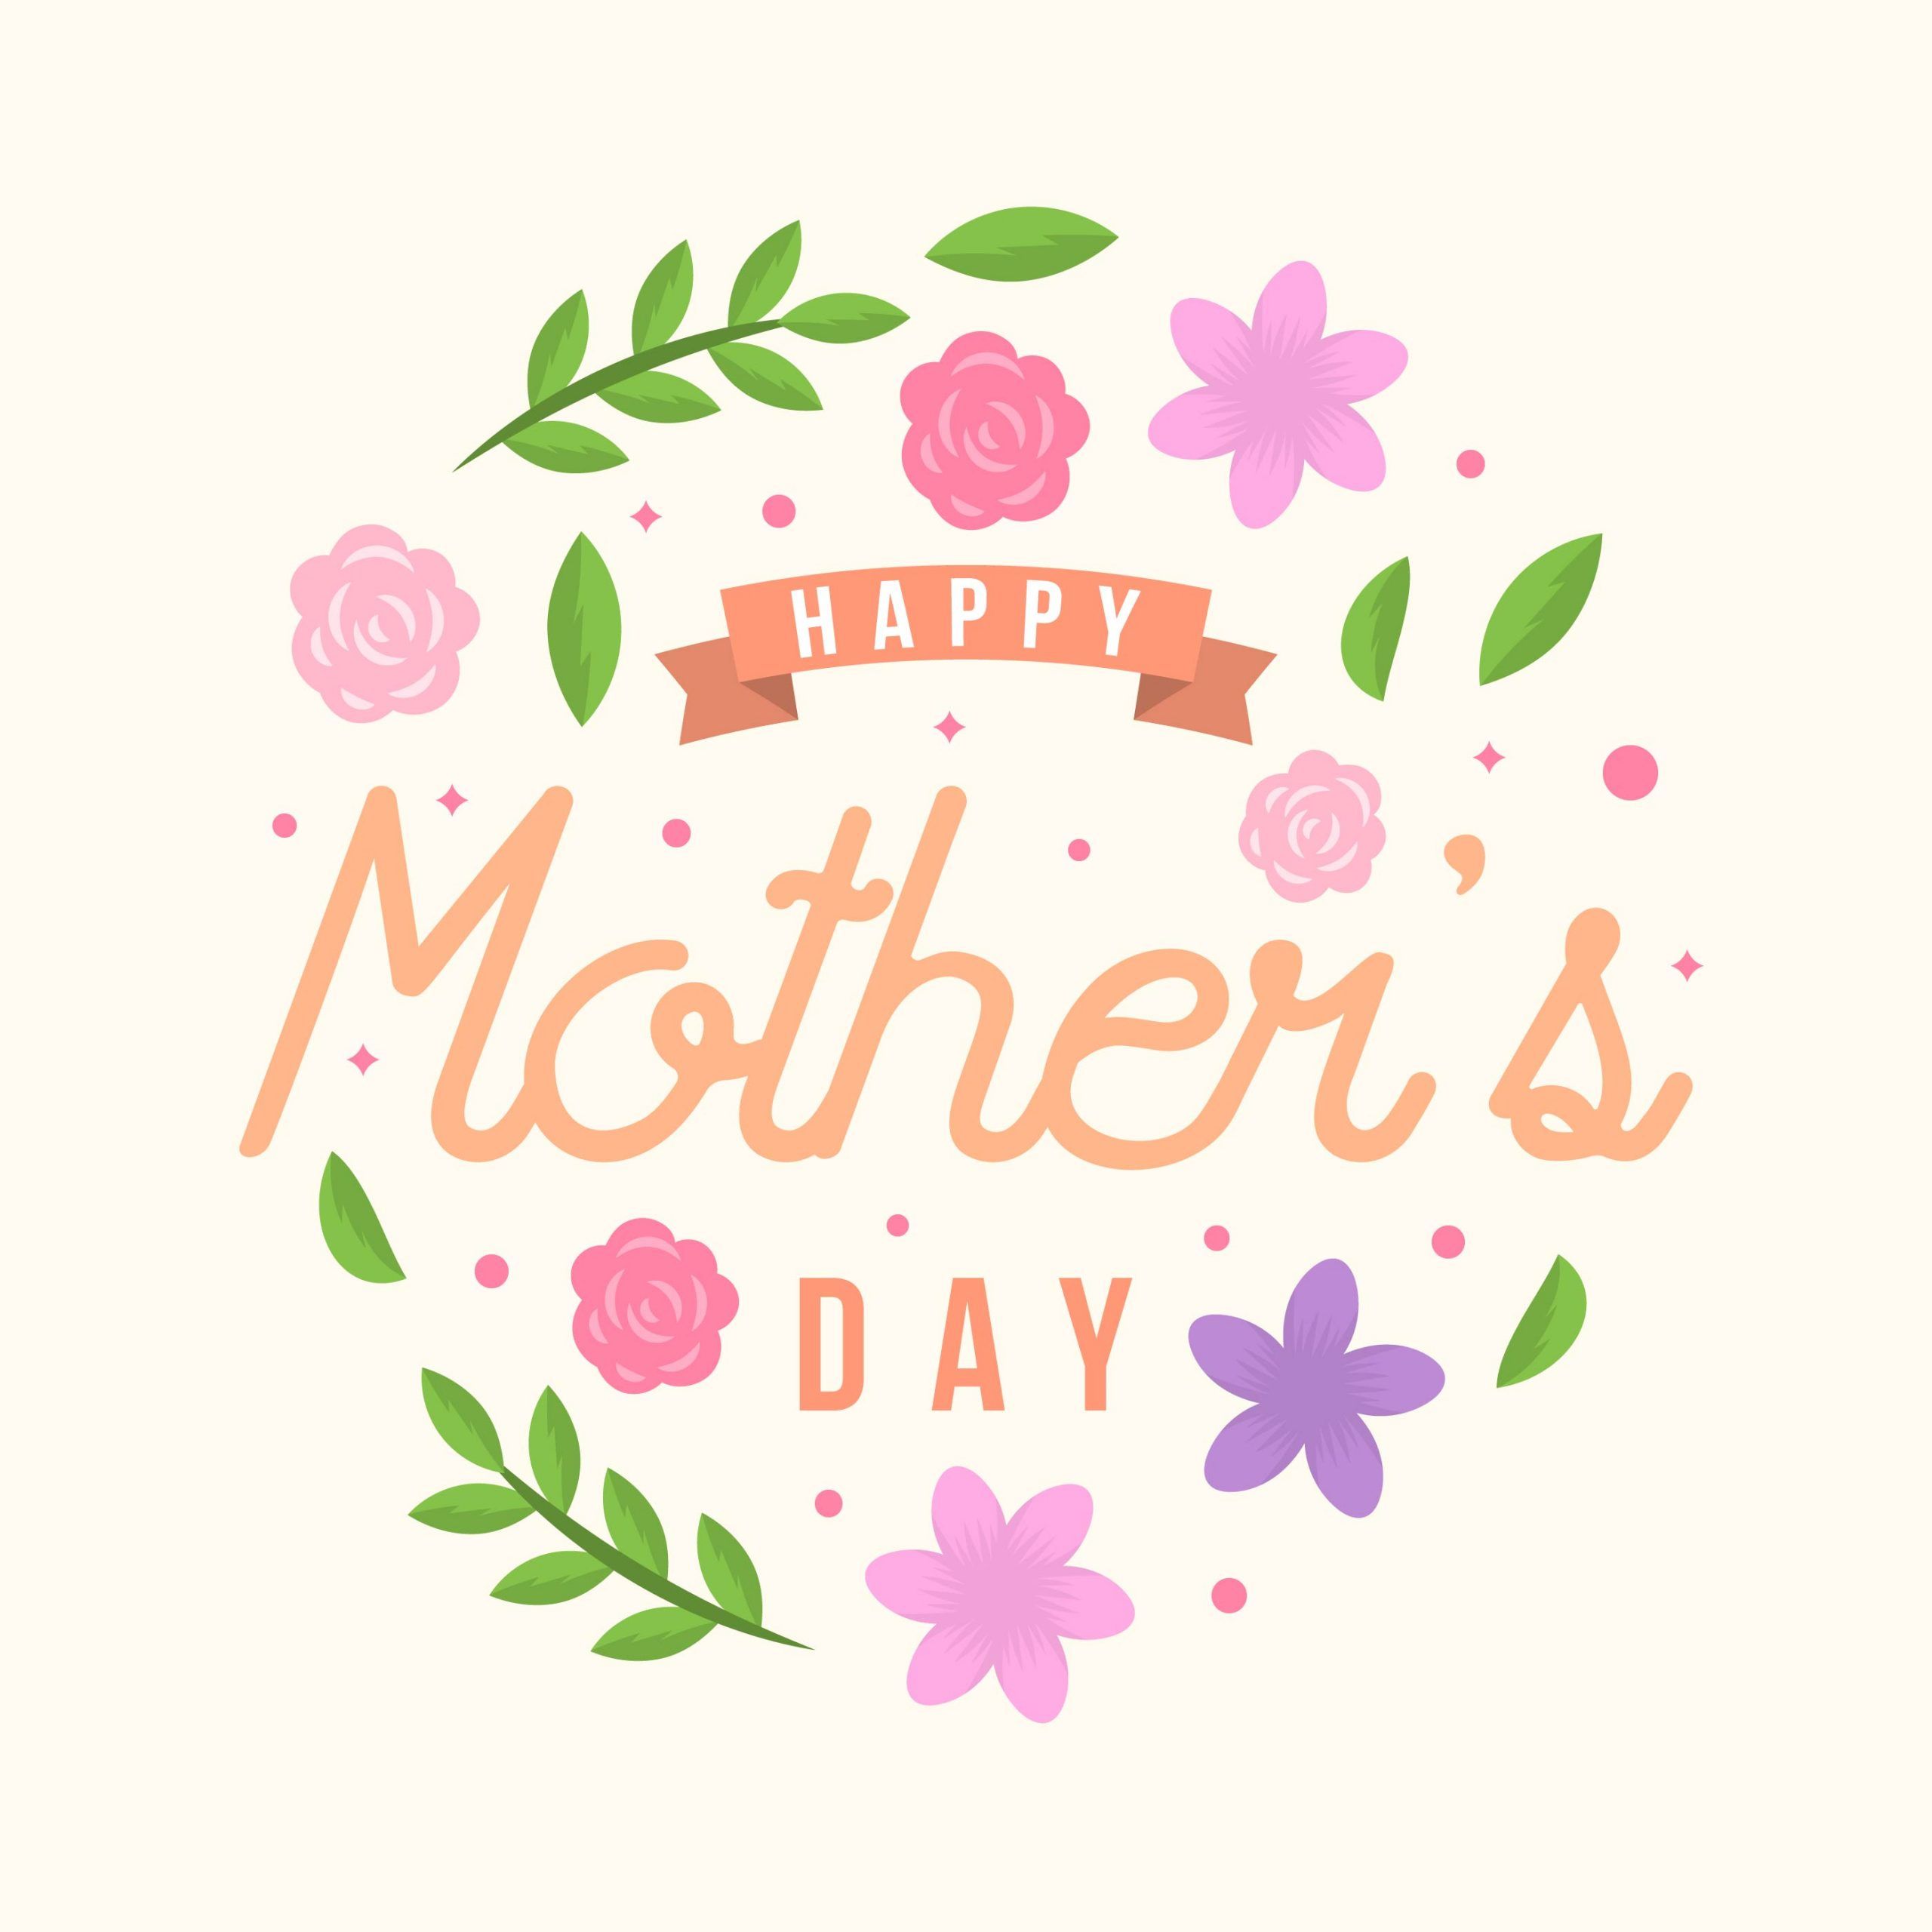 Happy Mothers Day Image 2021 Greeting Cards, Wishes Quotes Messages